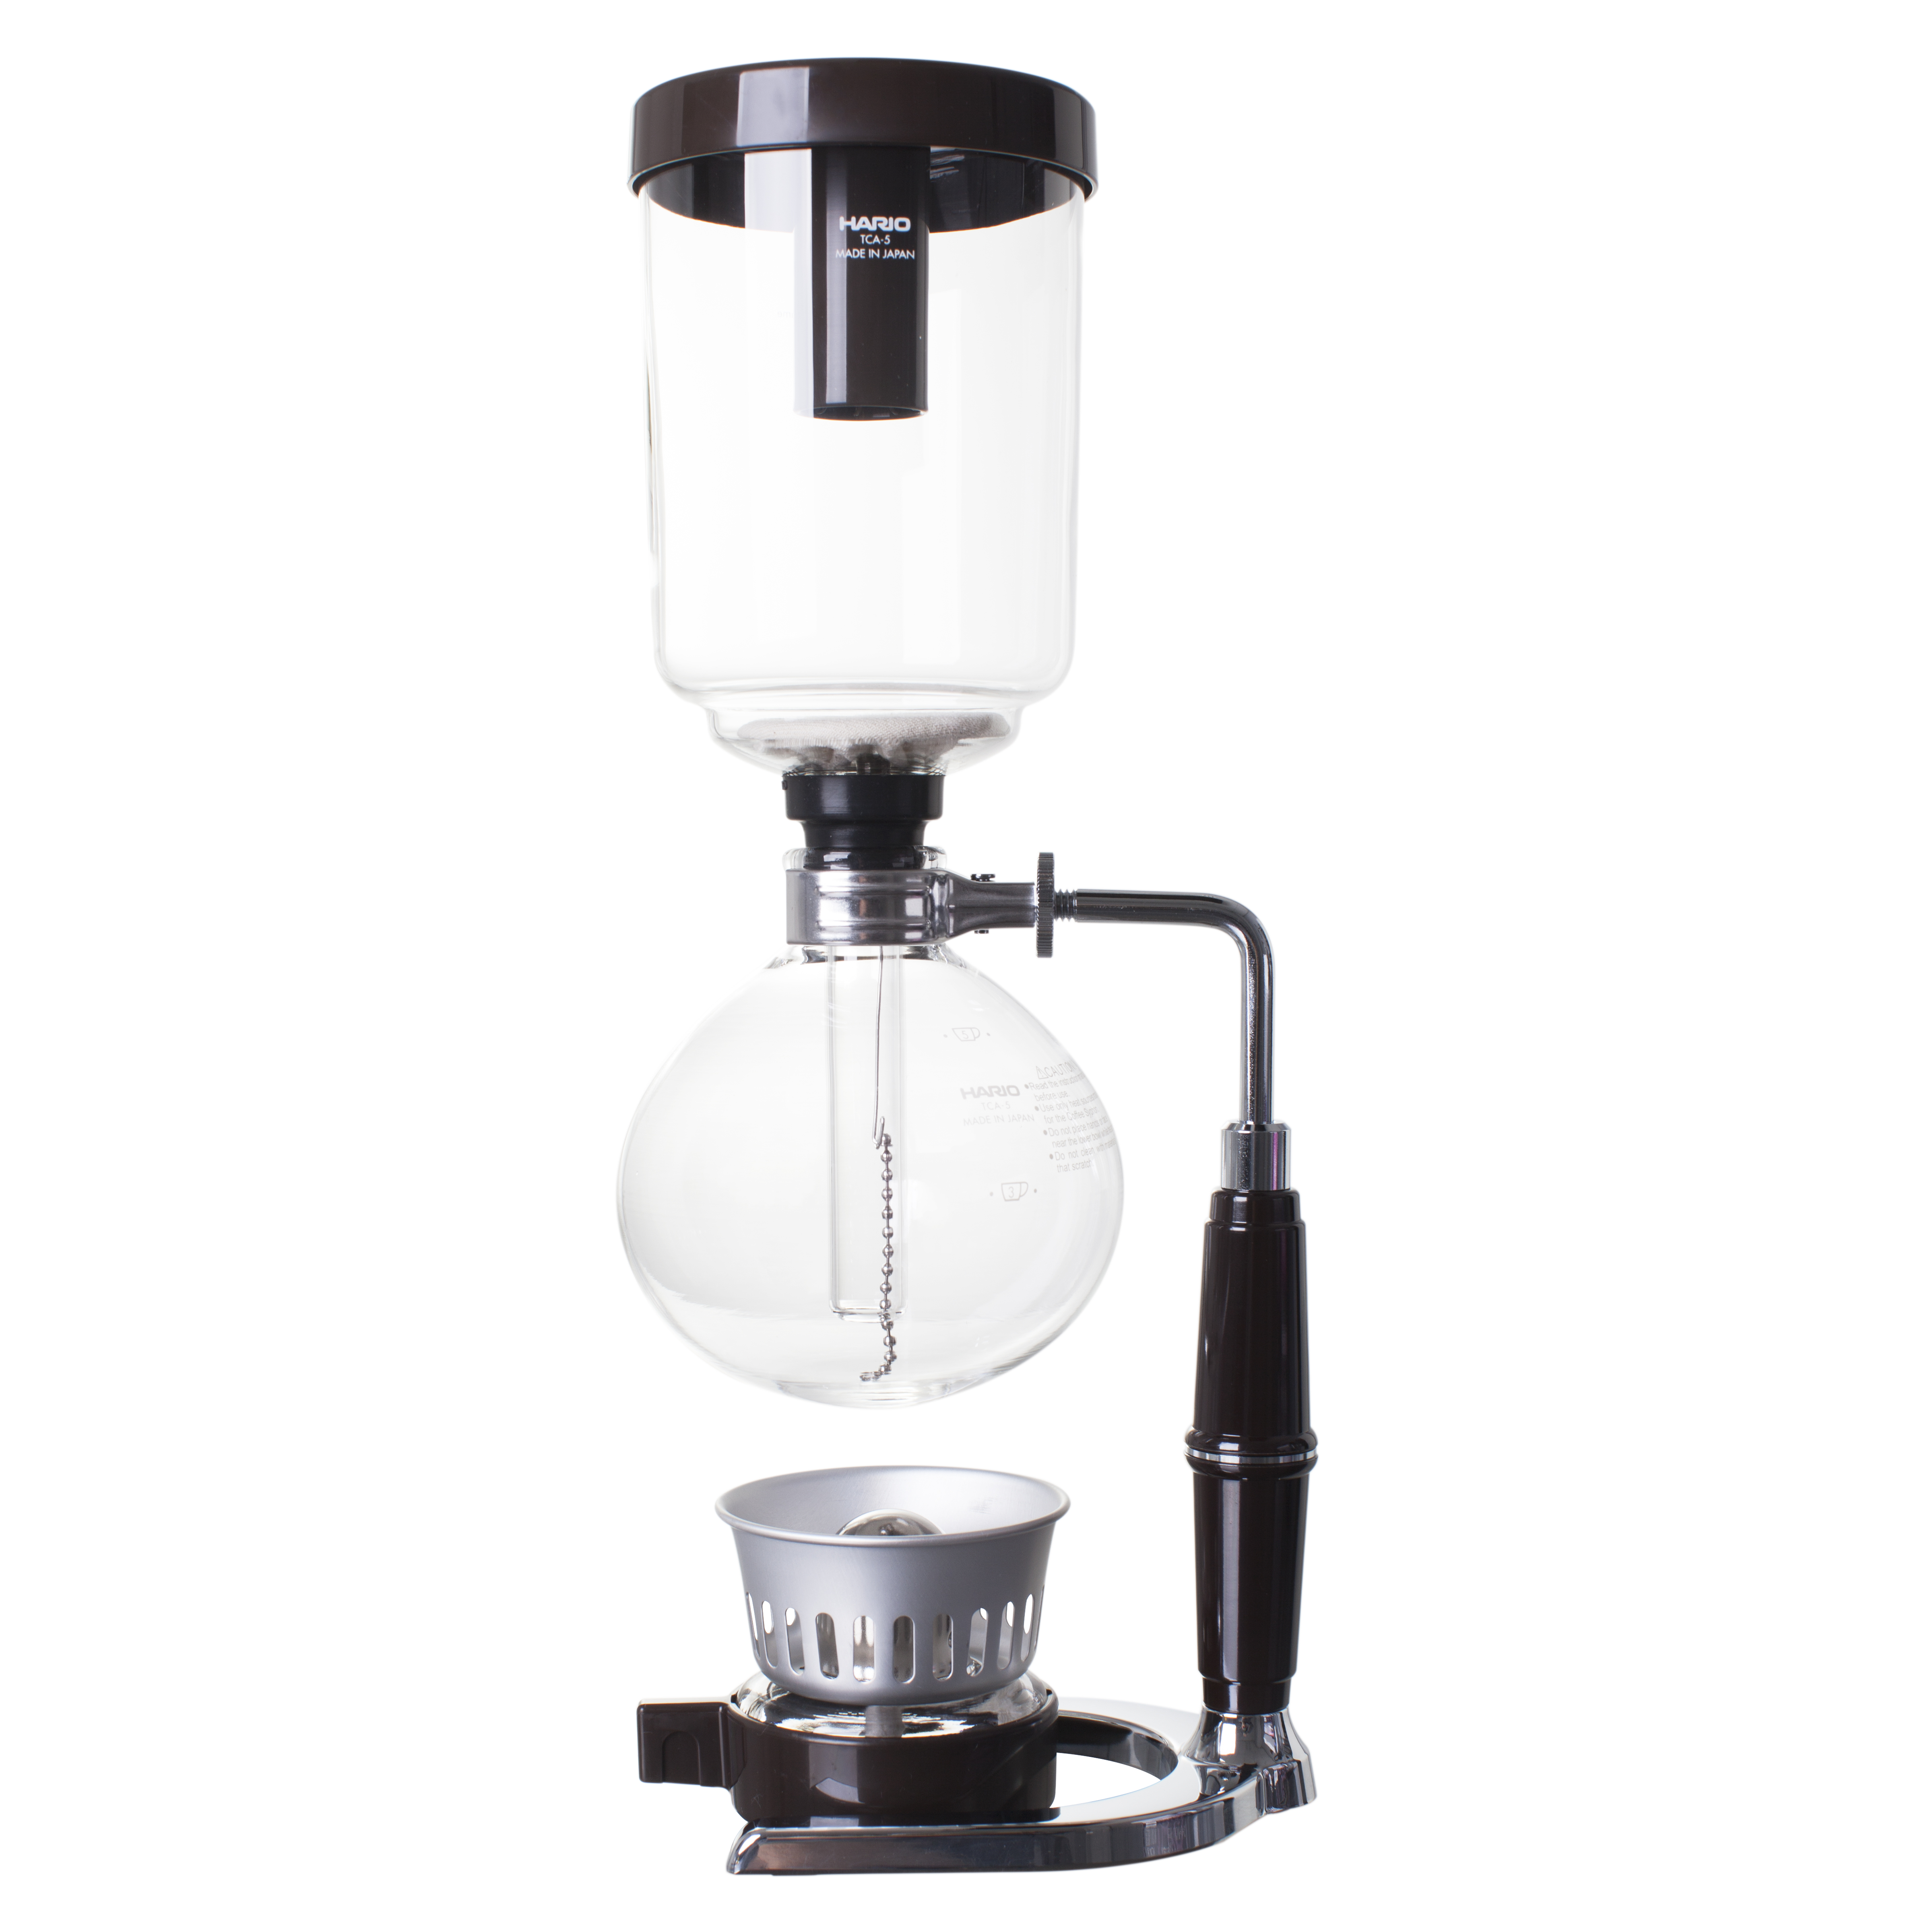 https://cdn11.bigcommerce.com/s-6h7ychjk4/images/stencil/original/products/8411/90399/hario-tabletop-coffee-siphon__95640.1597184239.jpg?c=1